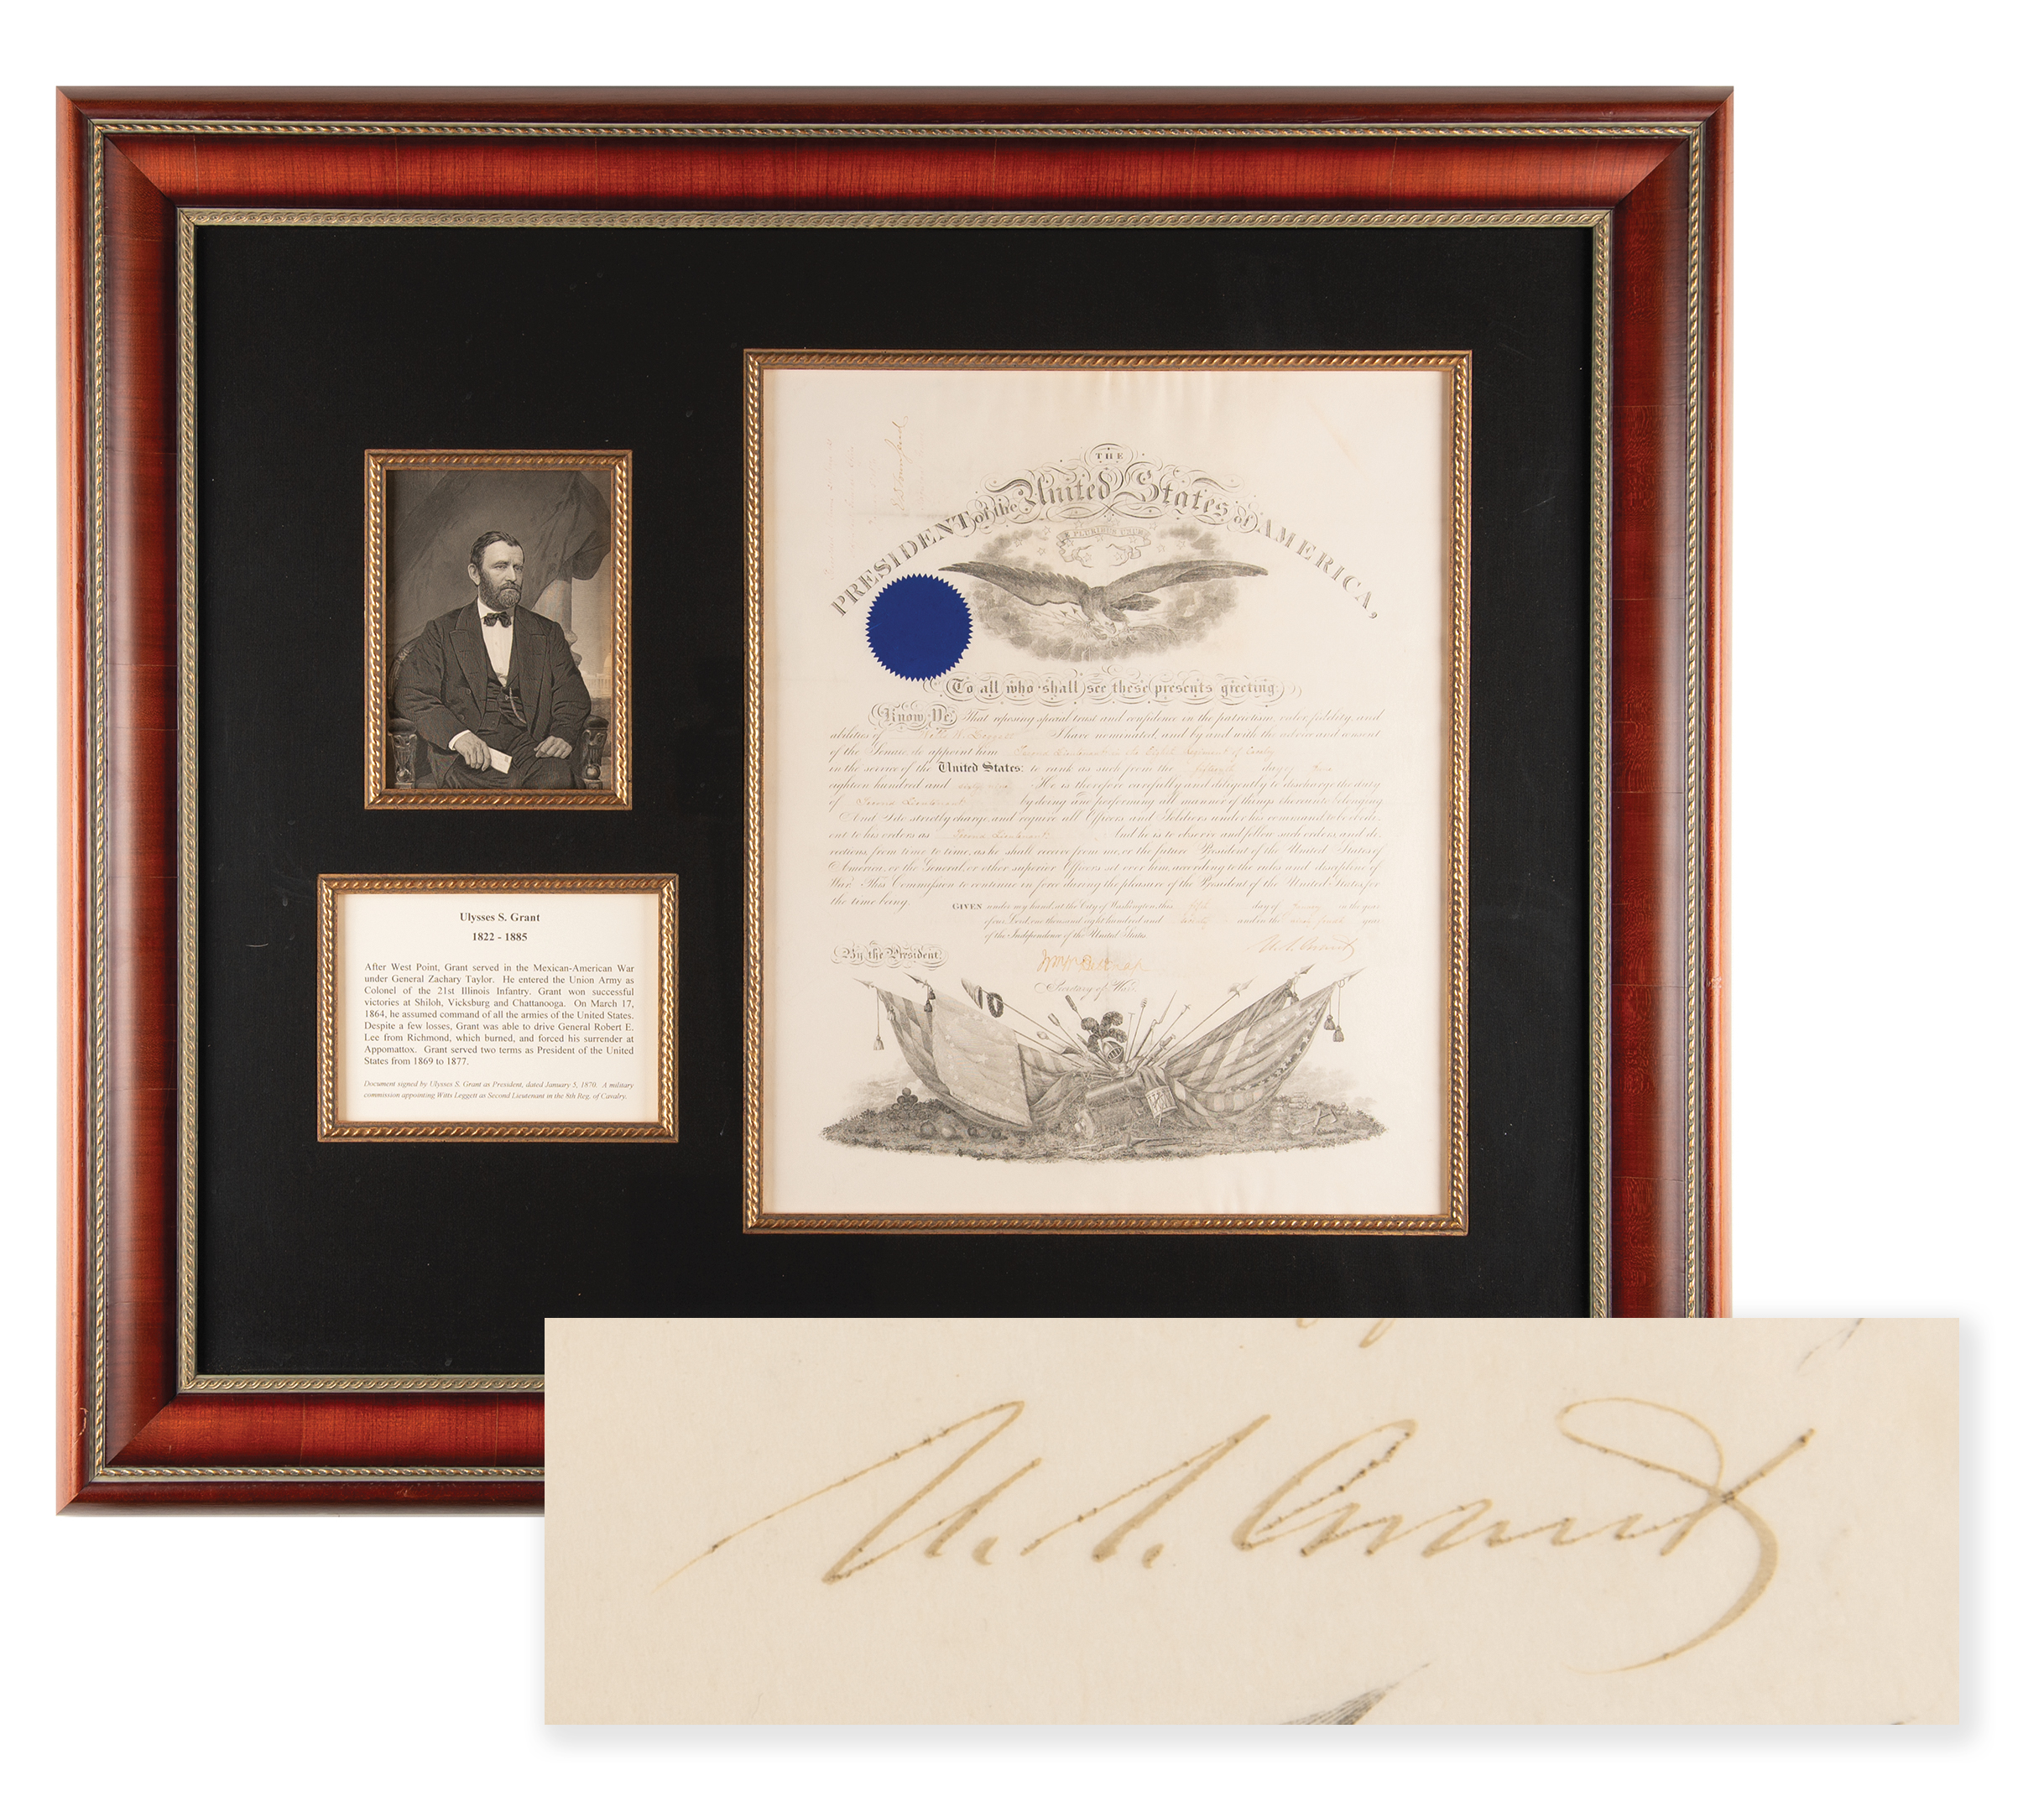 Lot #26 U. S. Grant Document Signed as President - Image 1